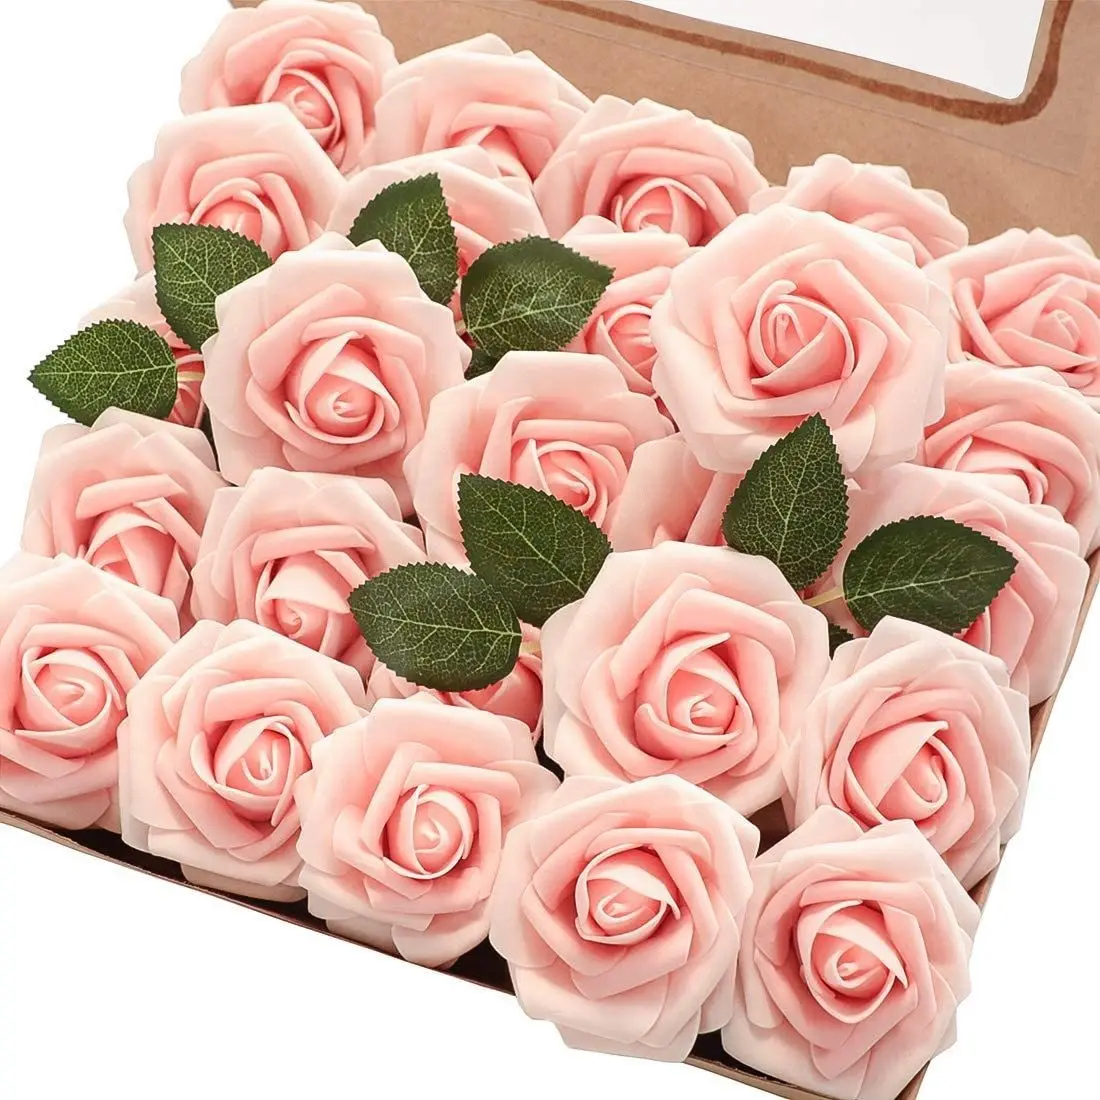 Wedding Decoration Flowers Simulated Gift Box 25PCS Foam PE Roses Artificial Flowers with Rod for Valentine's Day Gift